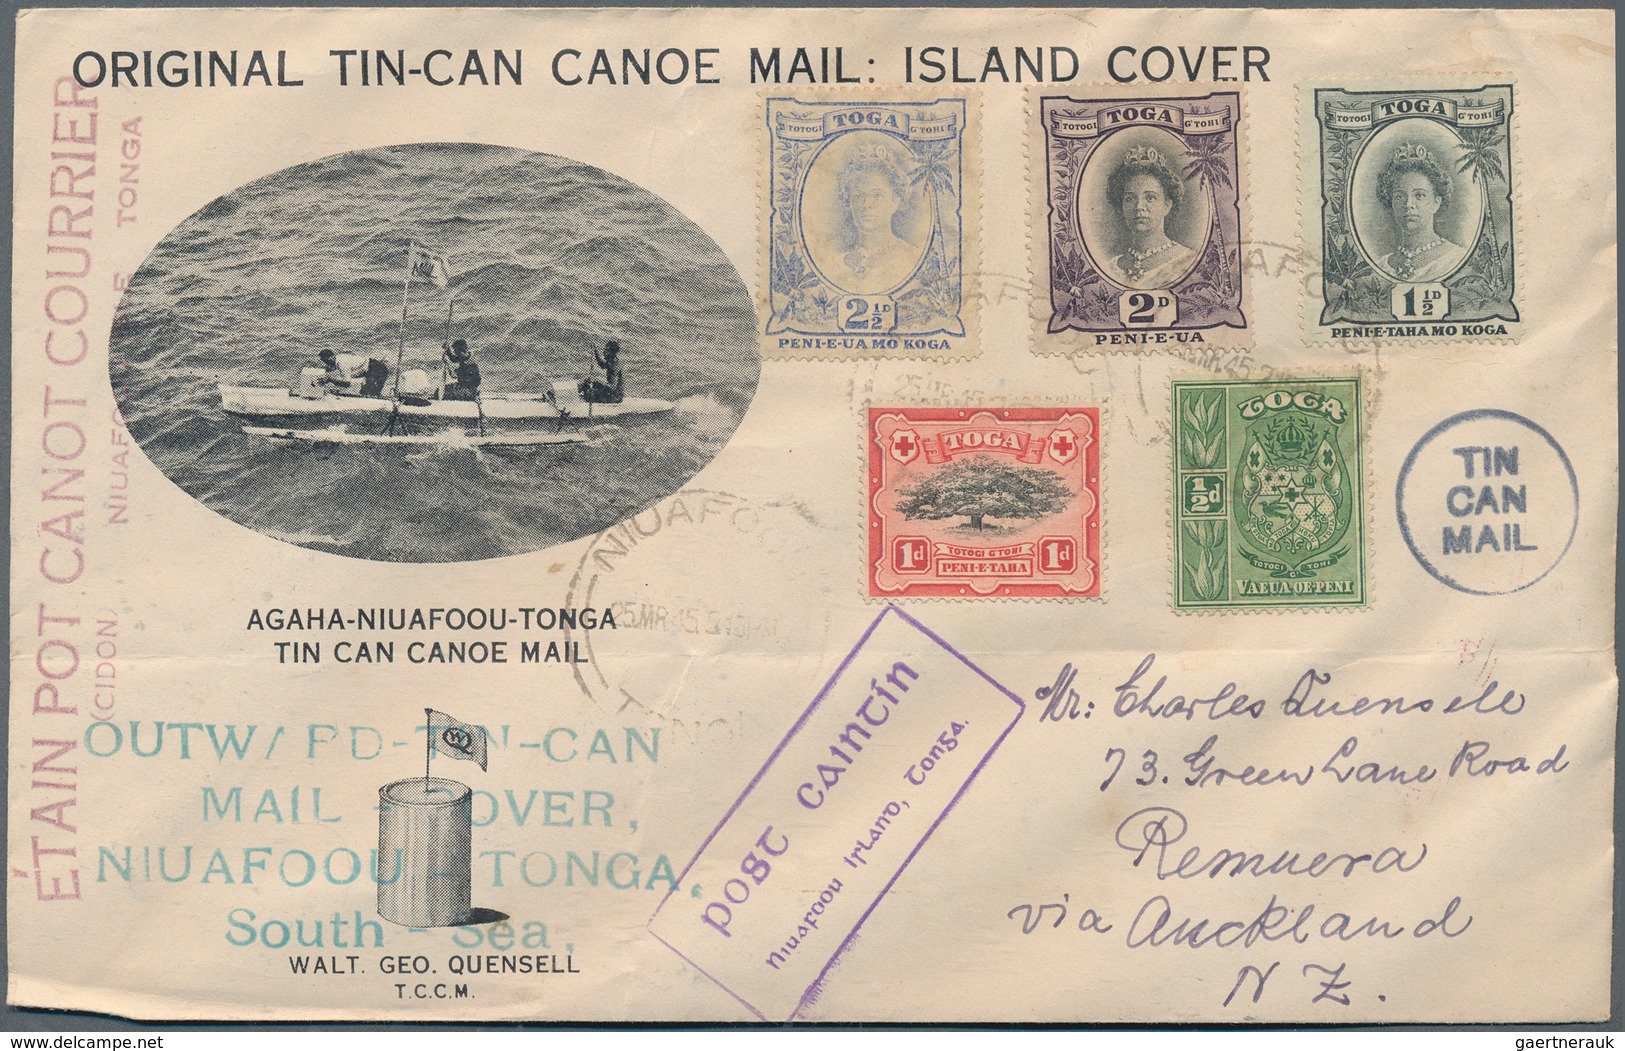 Alle Welt: 1932/1942, TIN CAN MAIL, comprehensive collection with 74 covers from different states ca